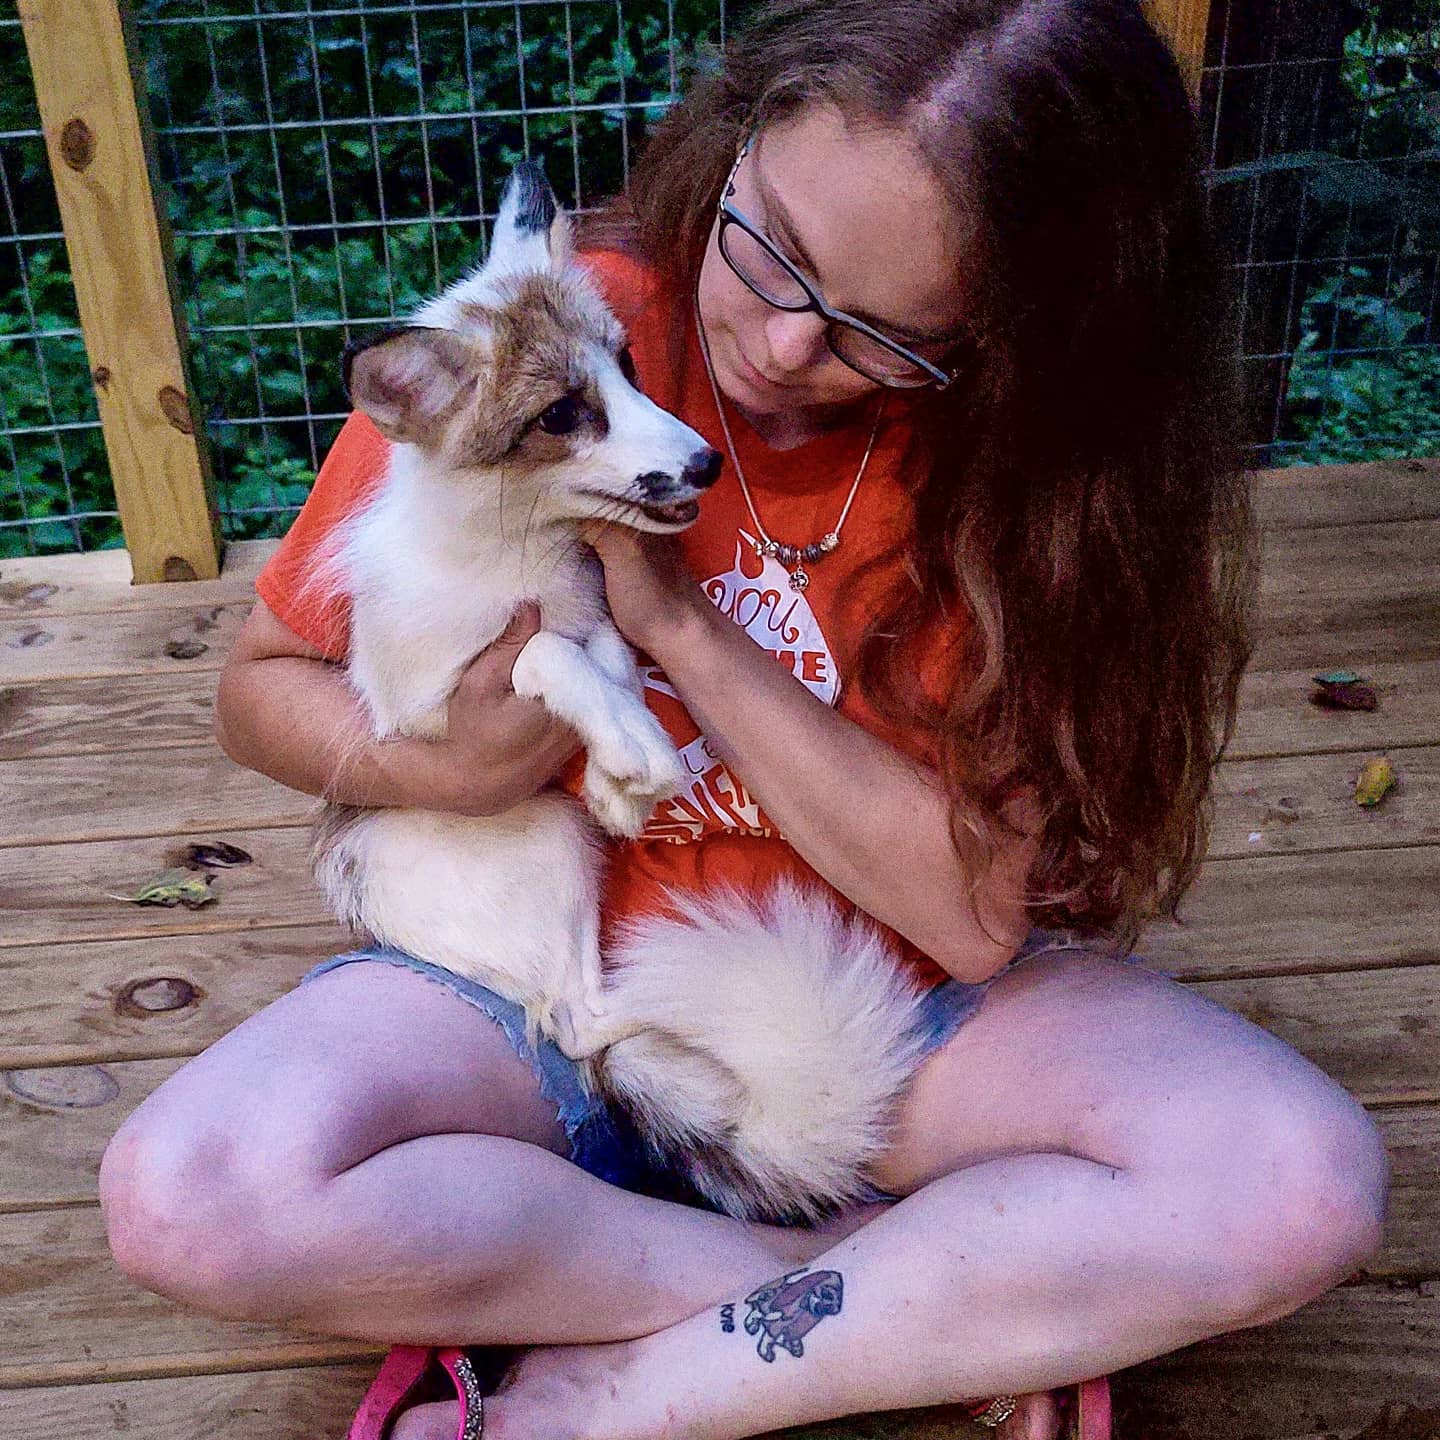 A photo of a woman with glasses and brown hair wearing an orange shirt sitting cross legged on a wooden platform and holding a pet red fox with an orange marble coat